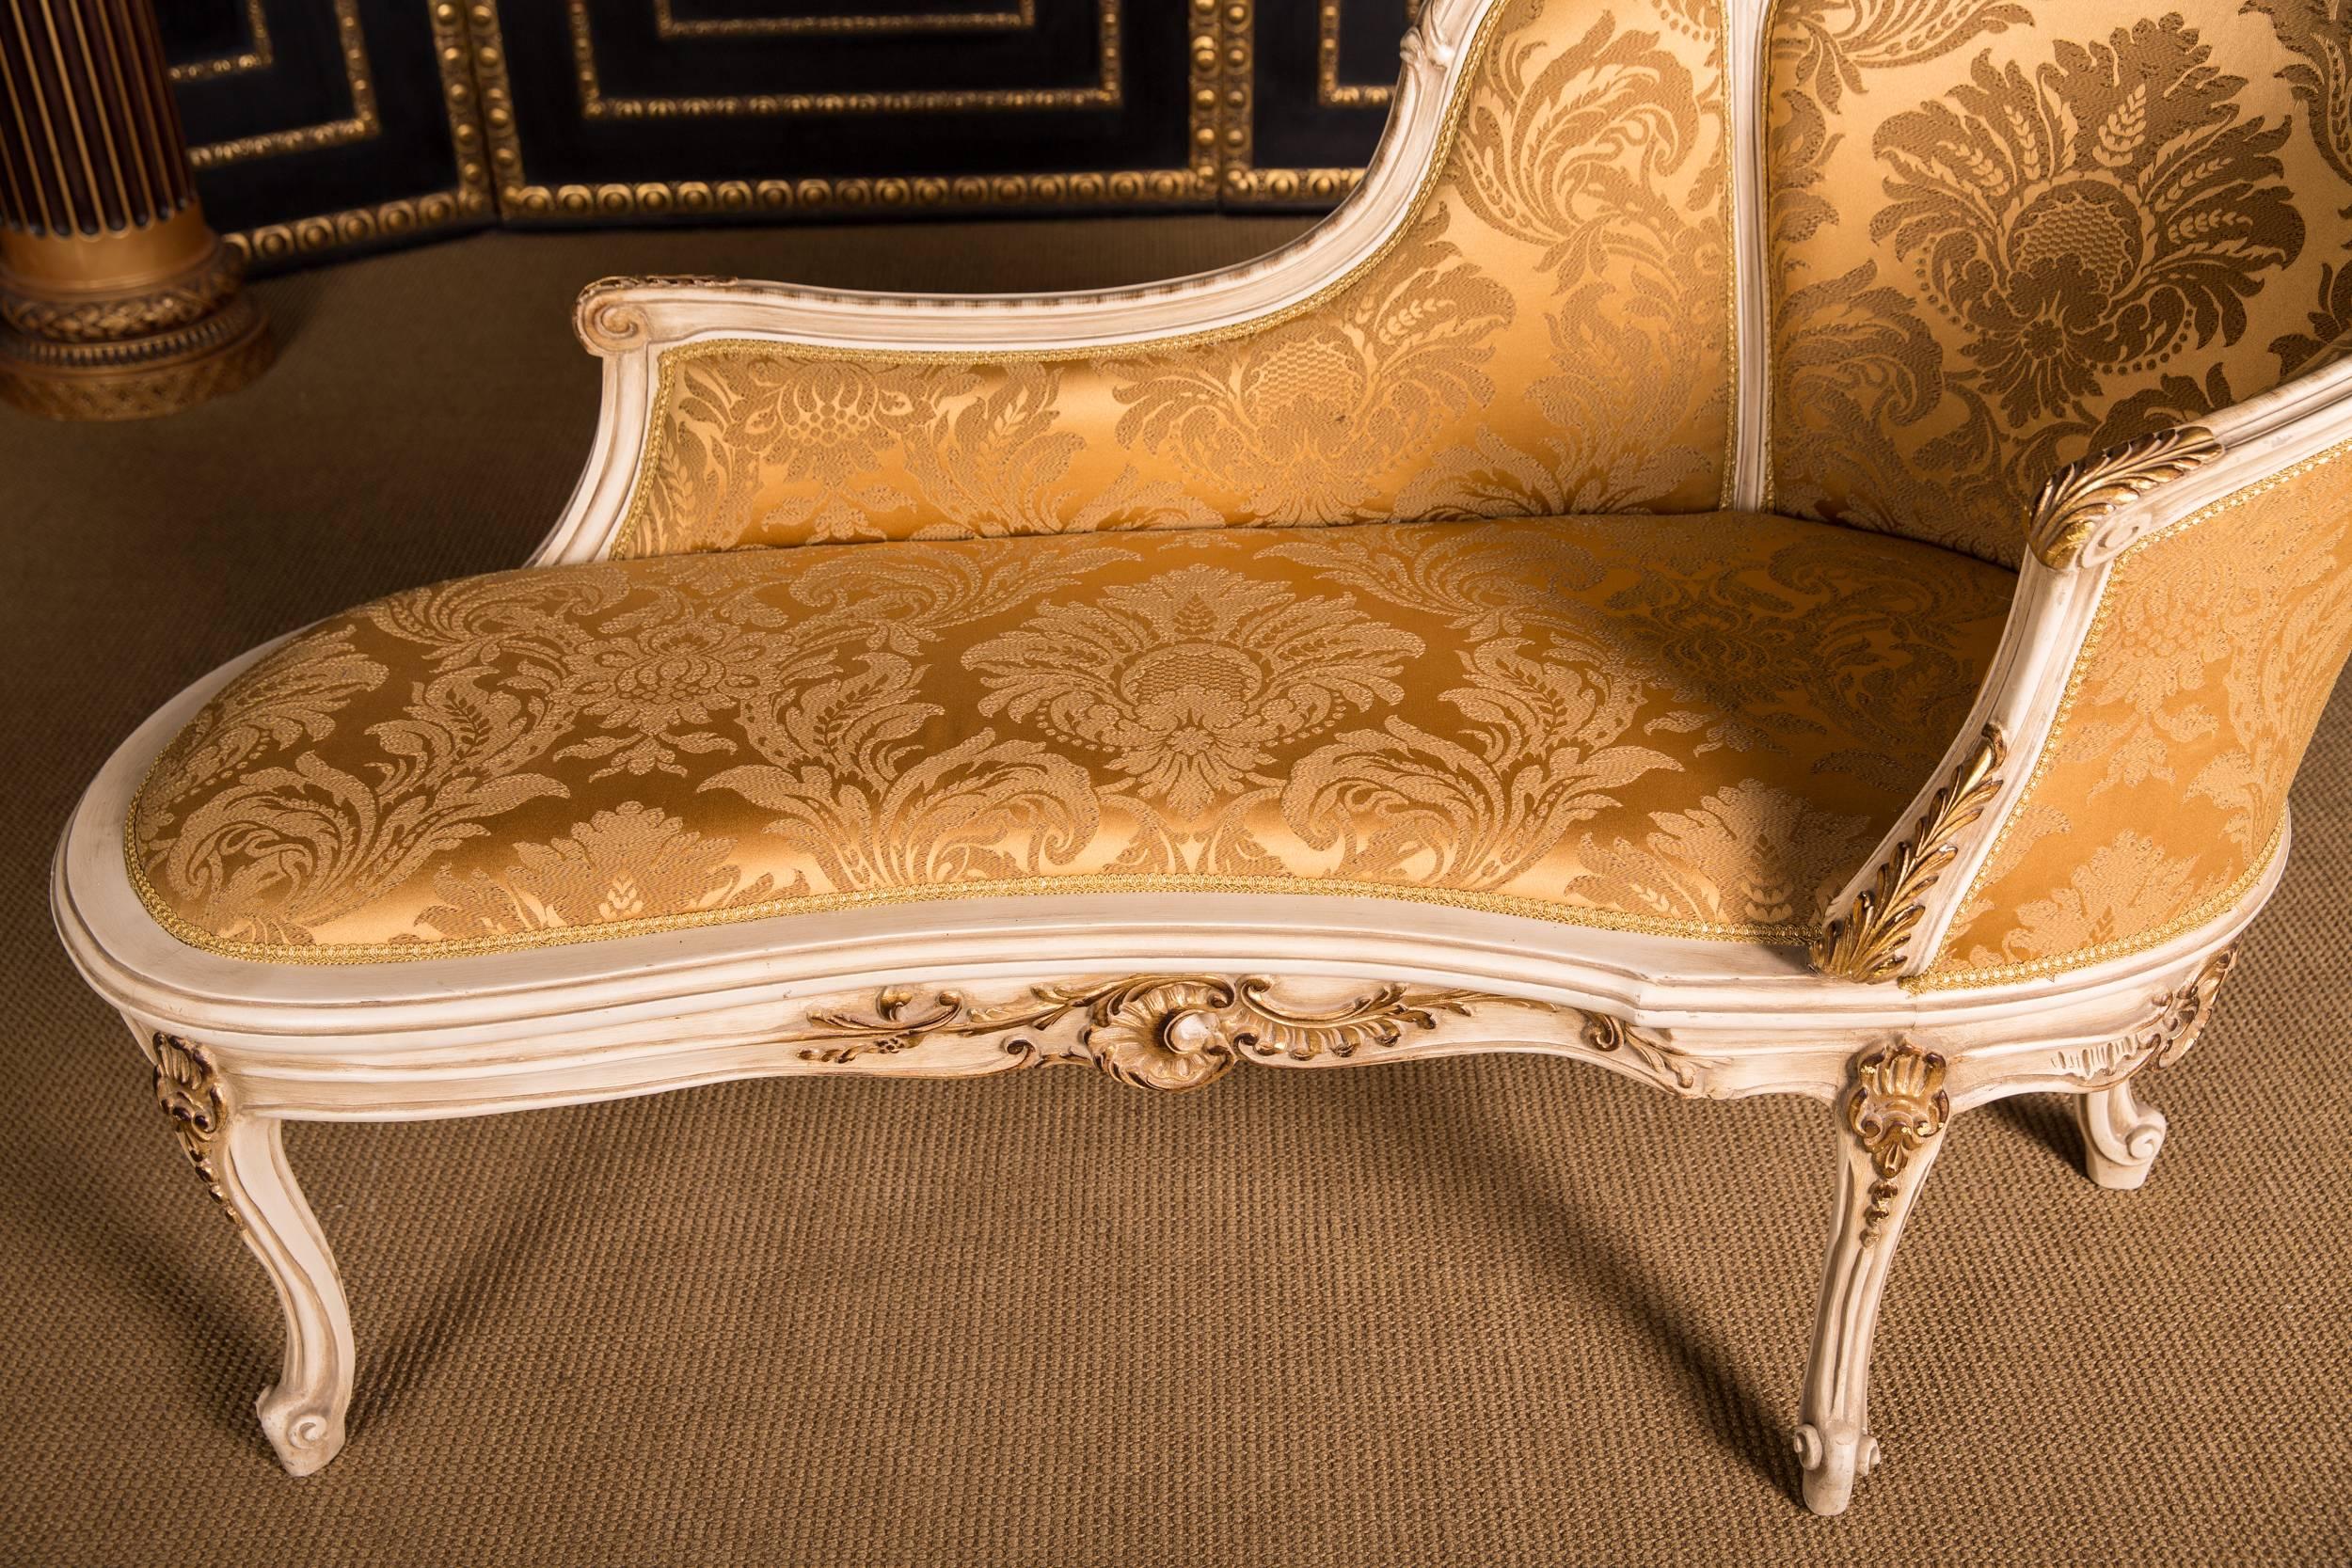 Hand-Carved Elegant French Chaise Longue in Louis Quinze Style